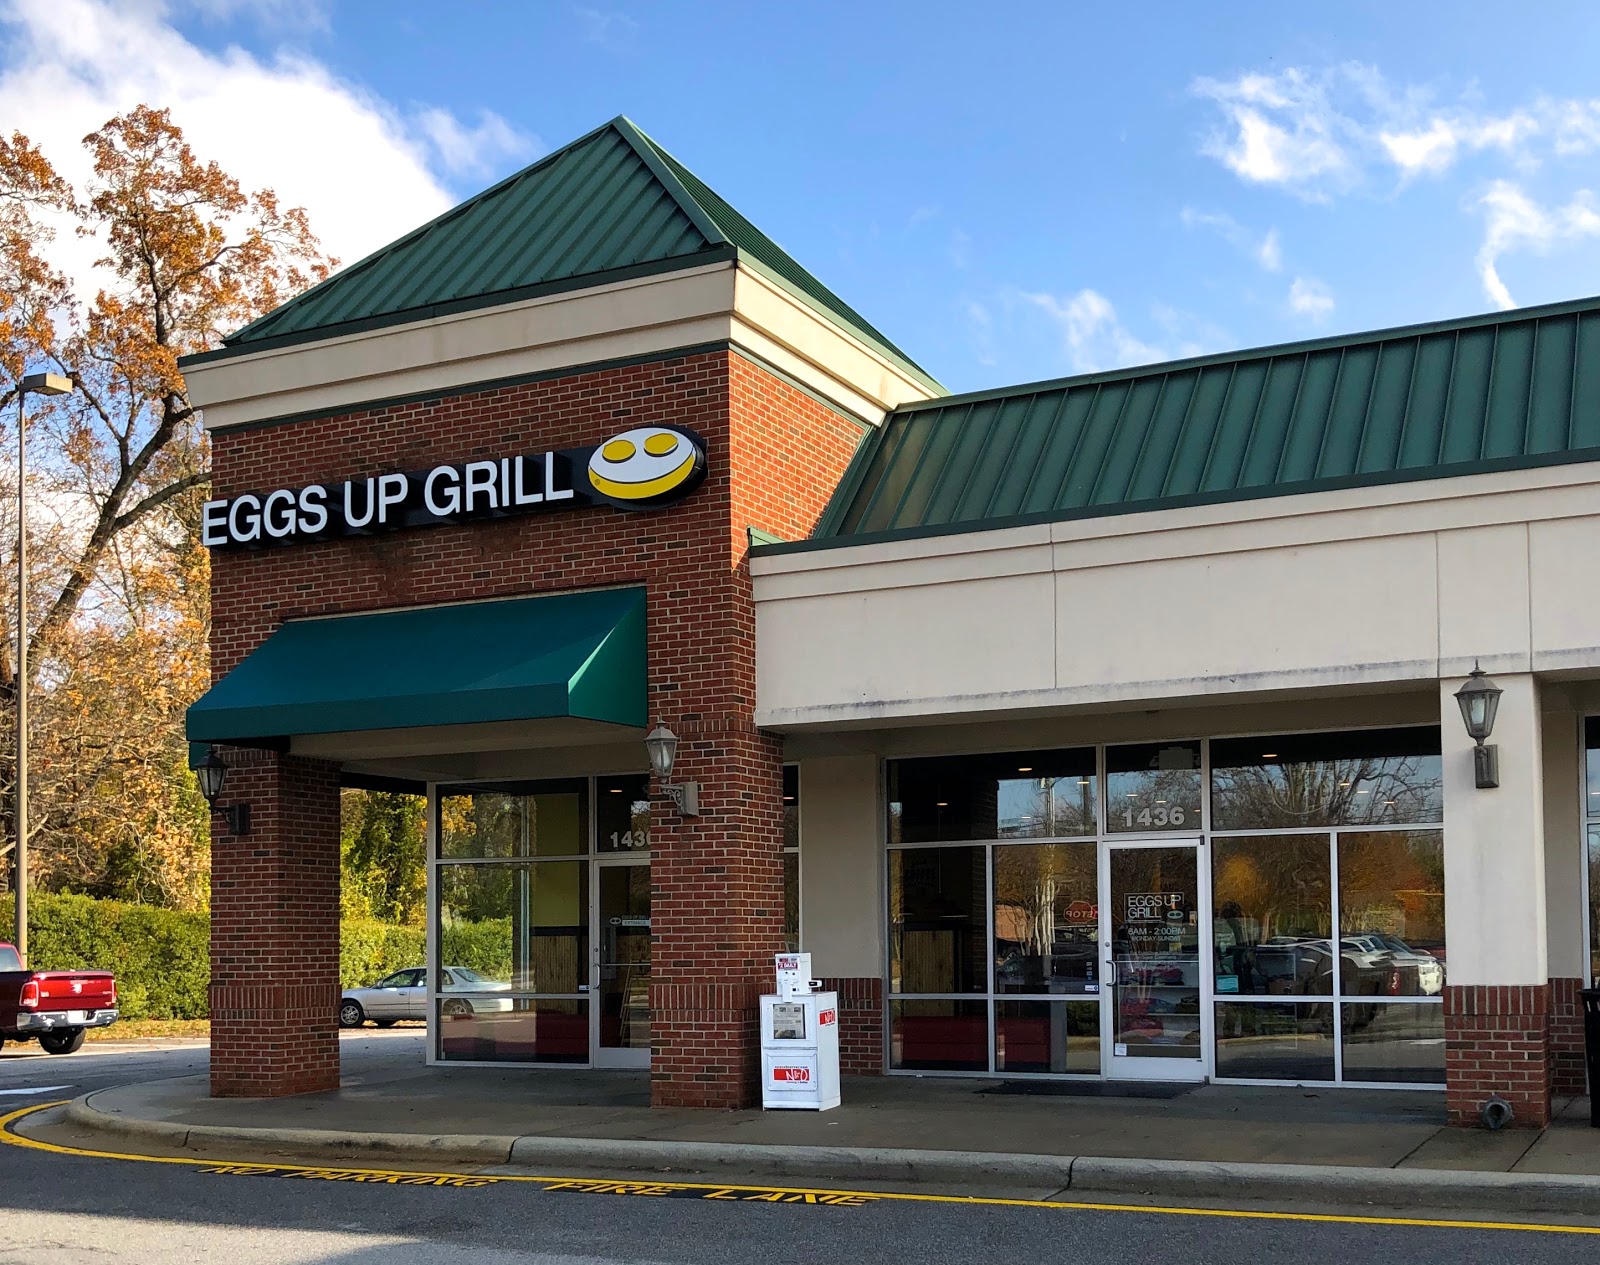 Eggs Up Grill Restaurant Review - Fuquay Varina, NC - Blue ...